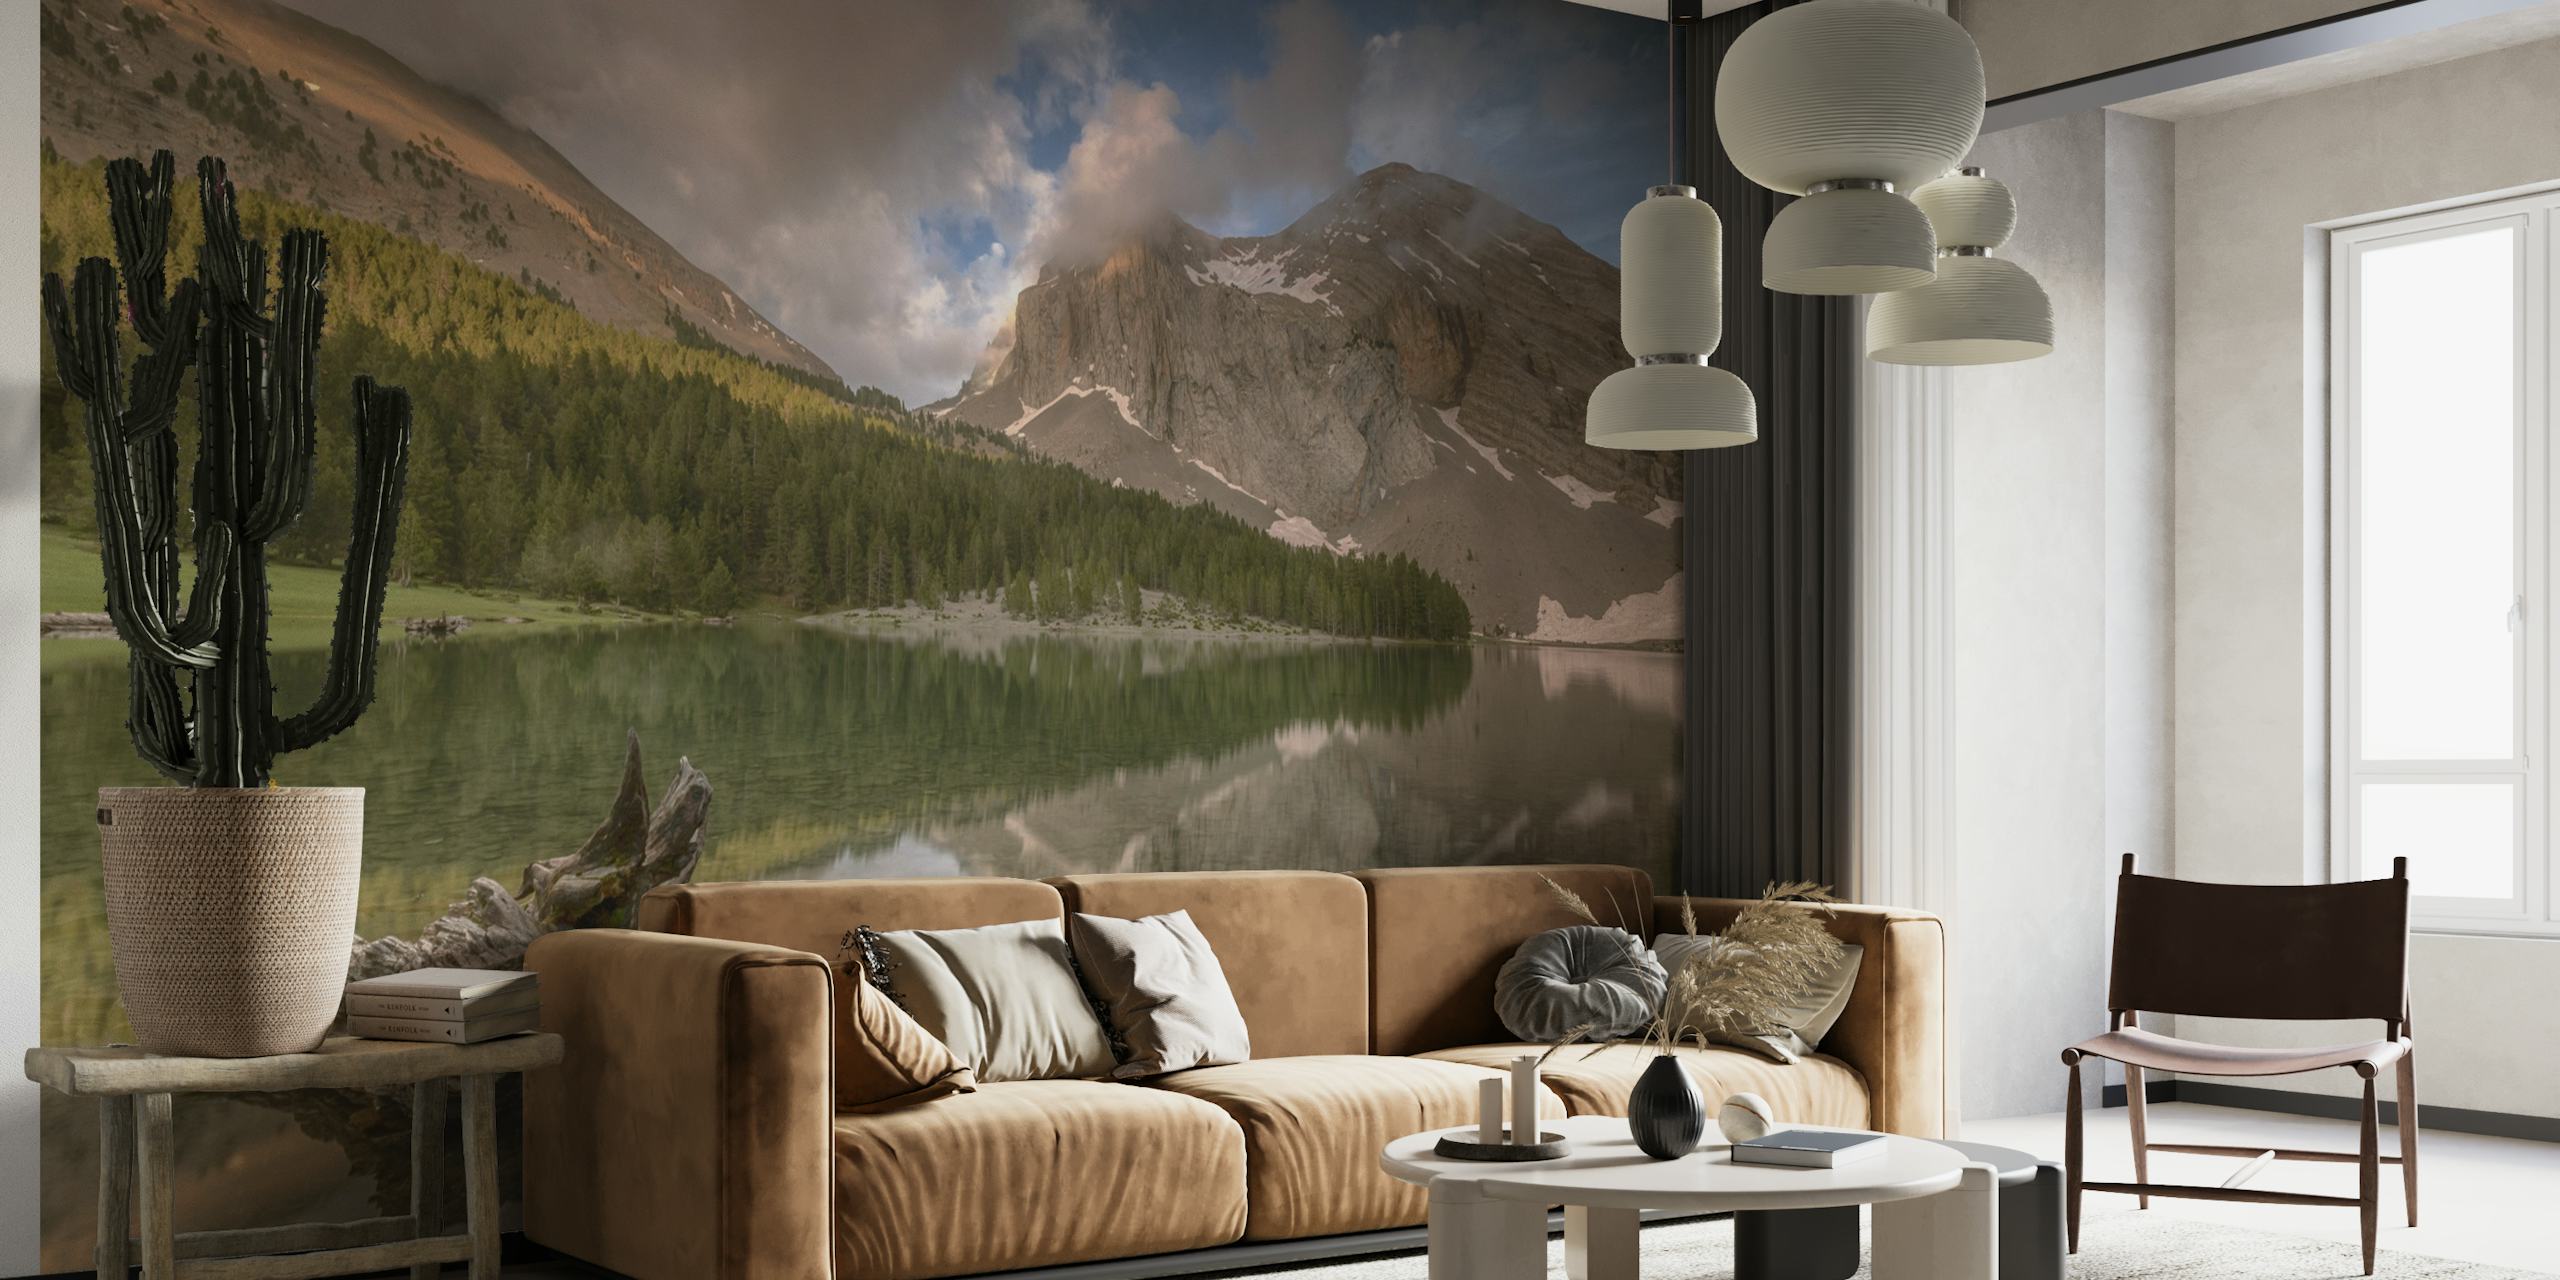 Ibon de Plan mountain lake wall mural with reflective water and forested landscape